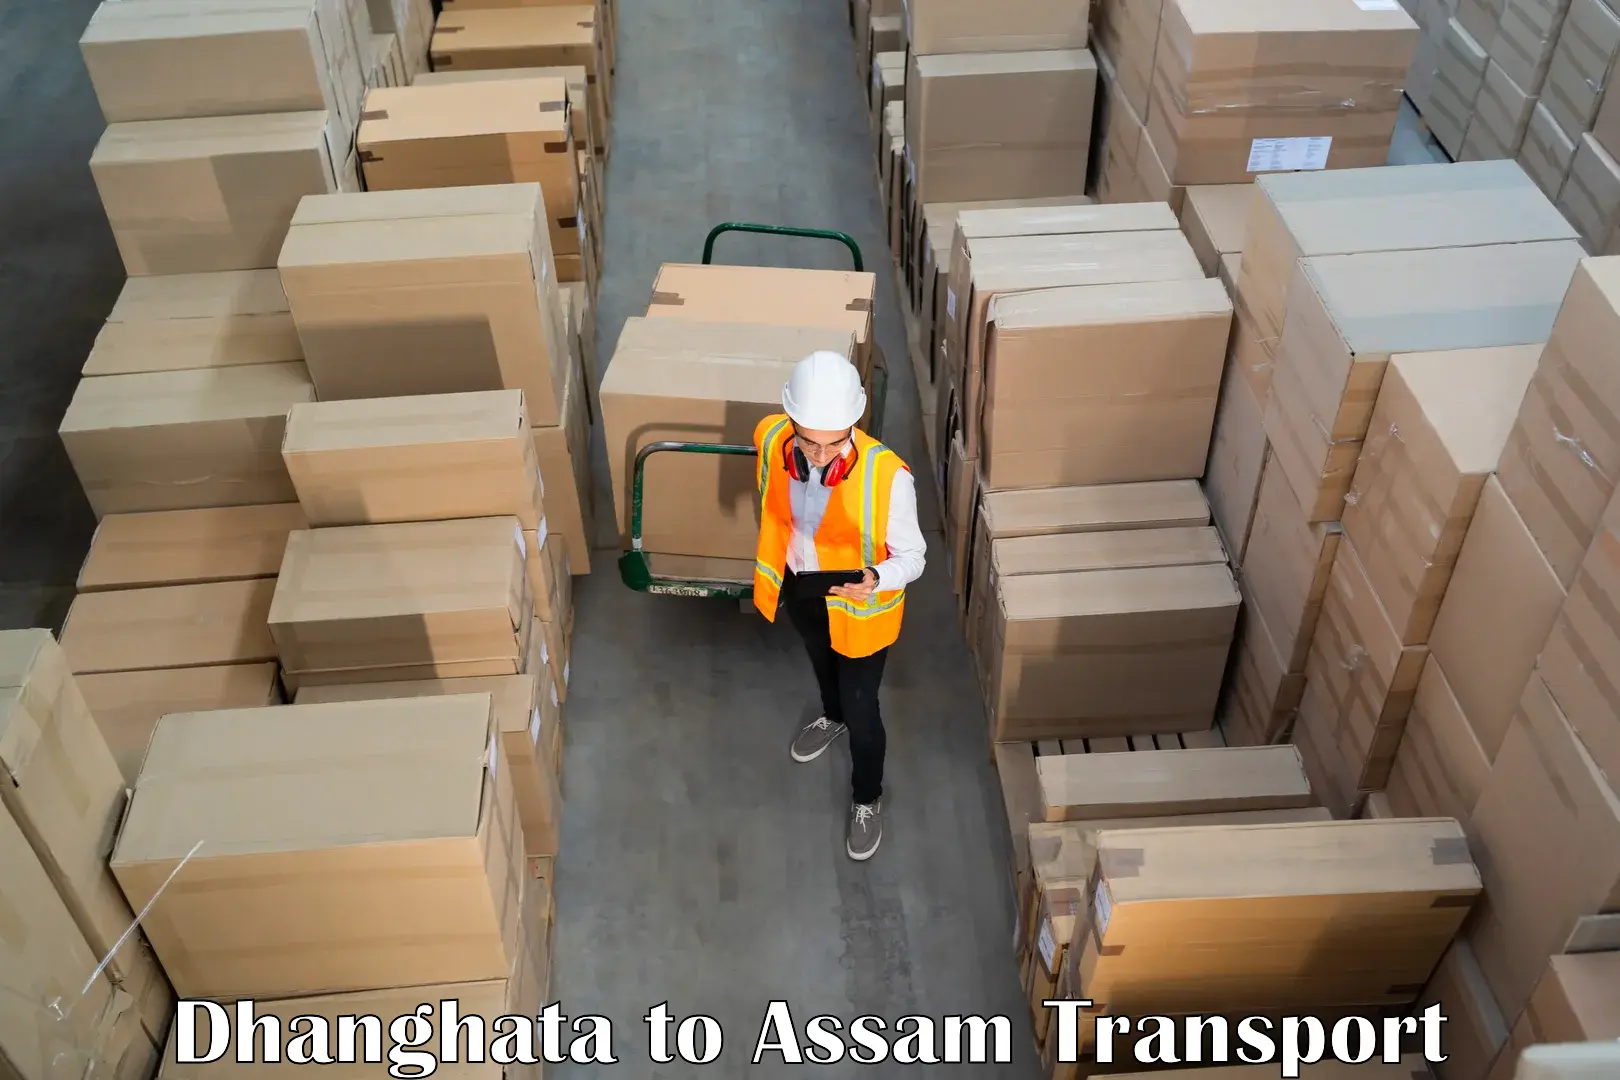 Commercial transport service Dhanghata to Dhupdhara